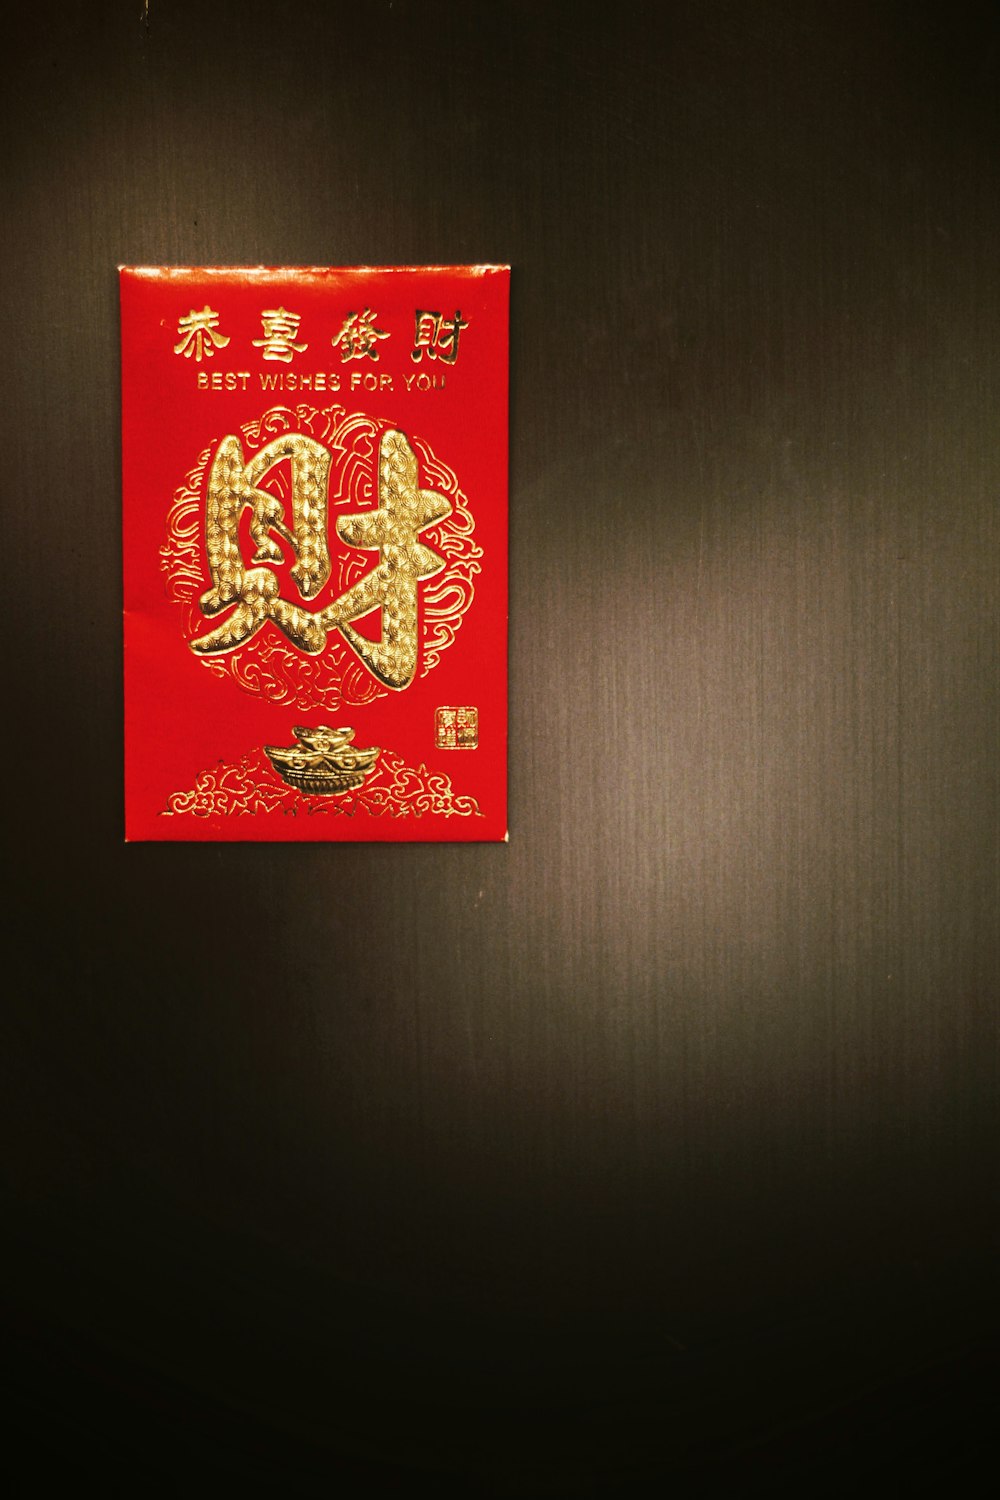 red and white kanji text print card